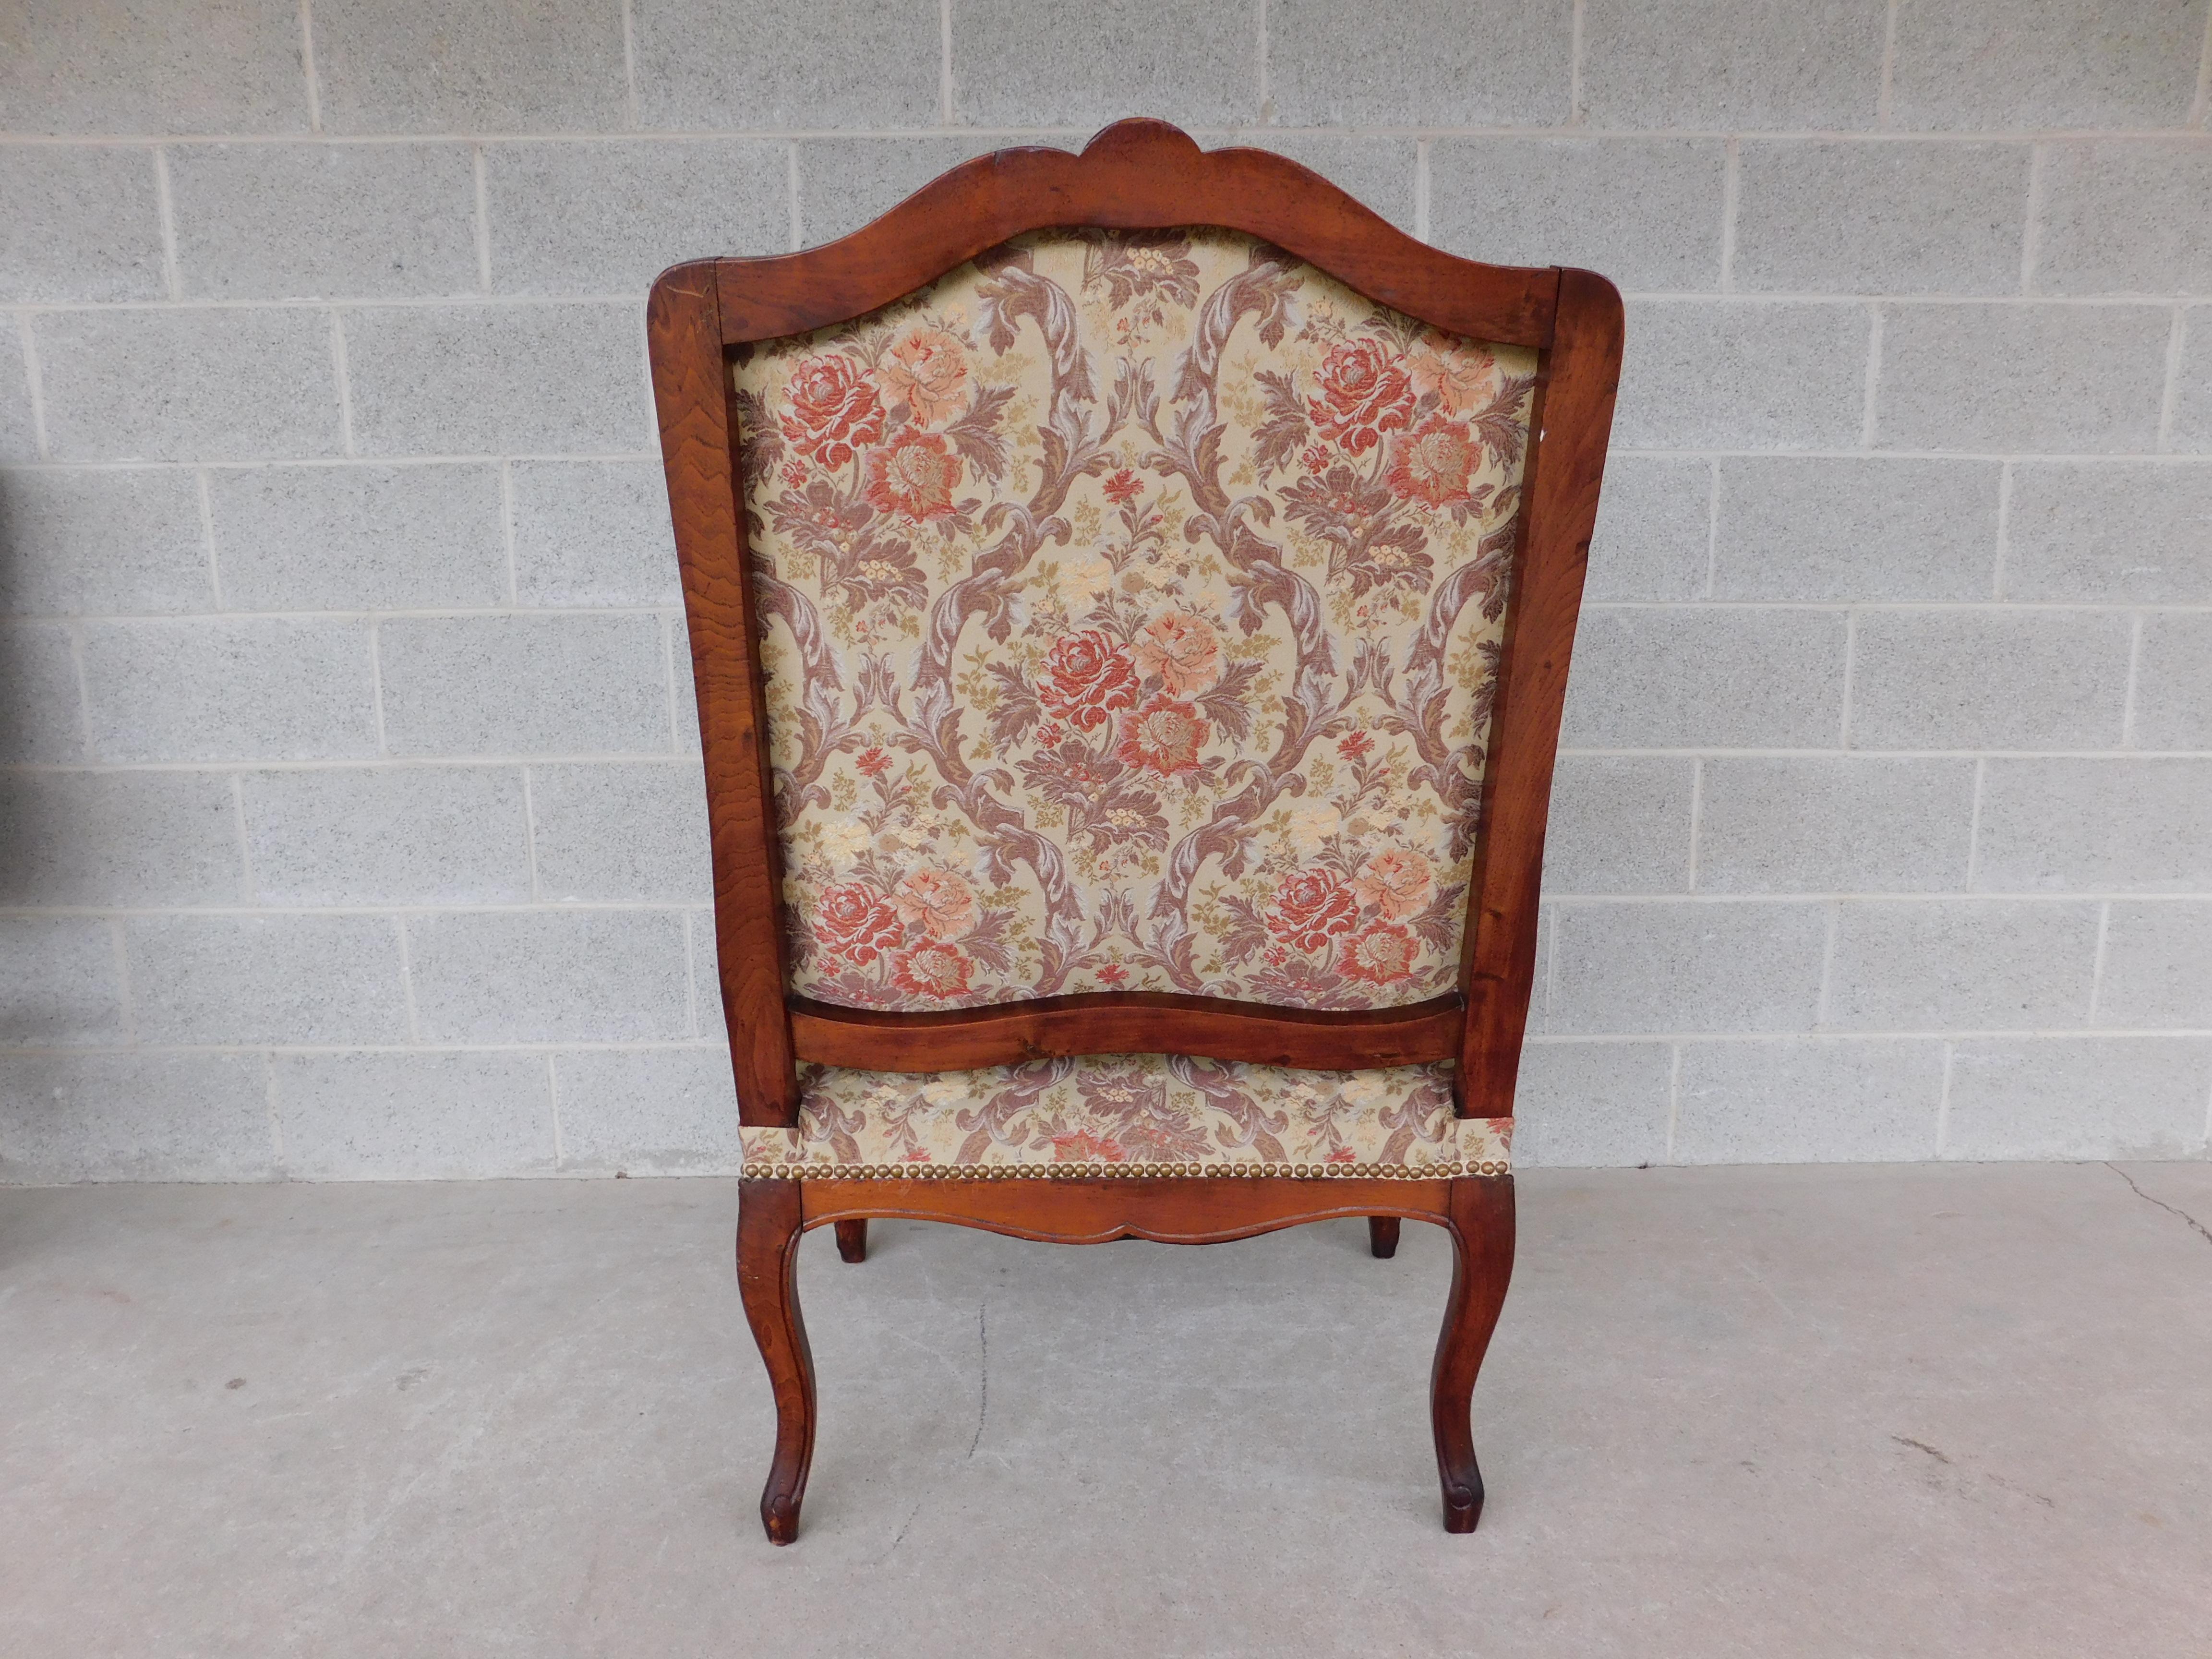 Vintage French Louis XV Style Fauteuil Chairs  - a Pair For Sale 5